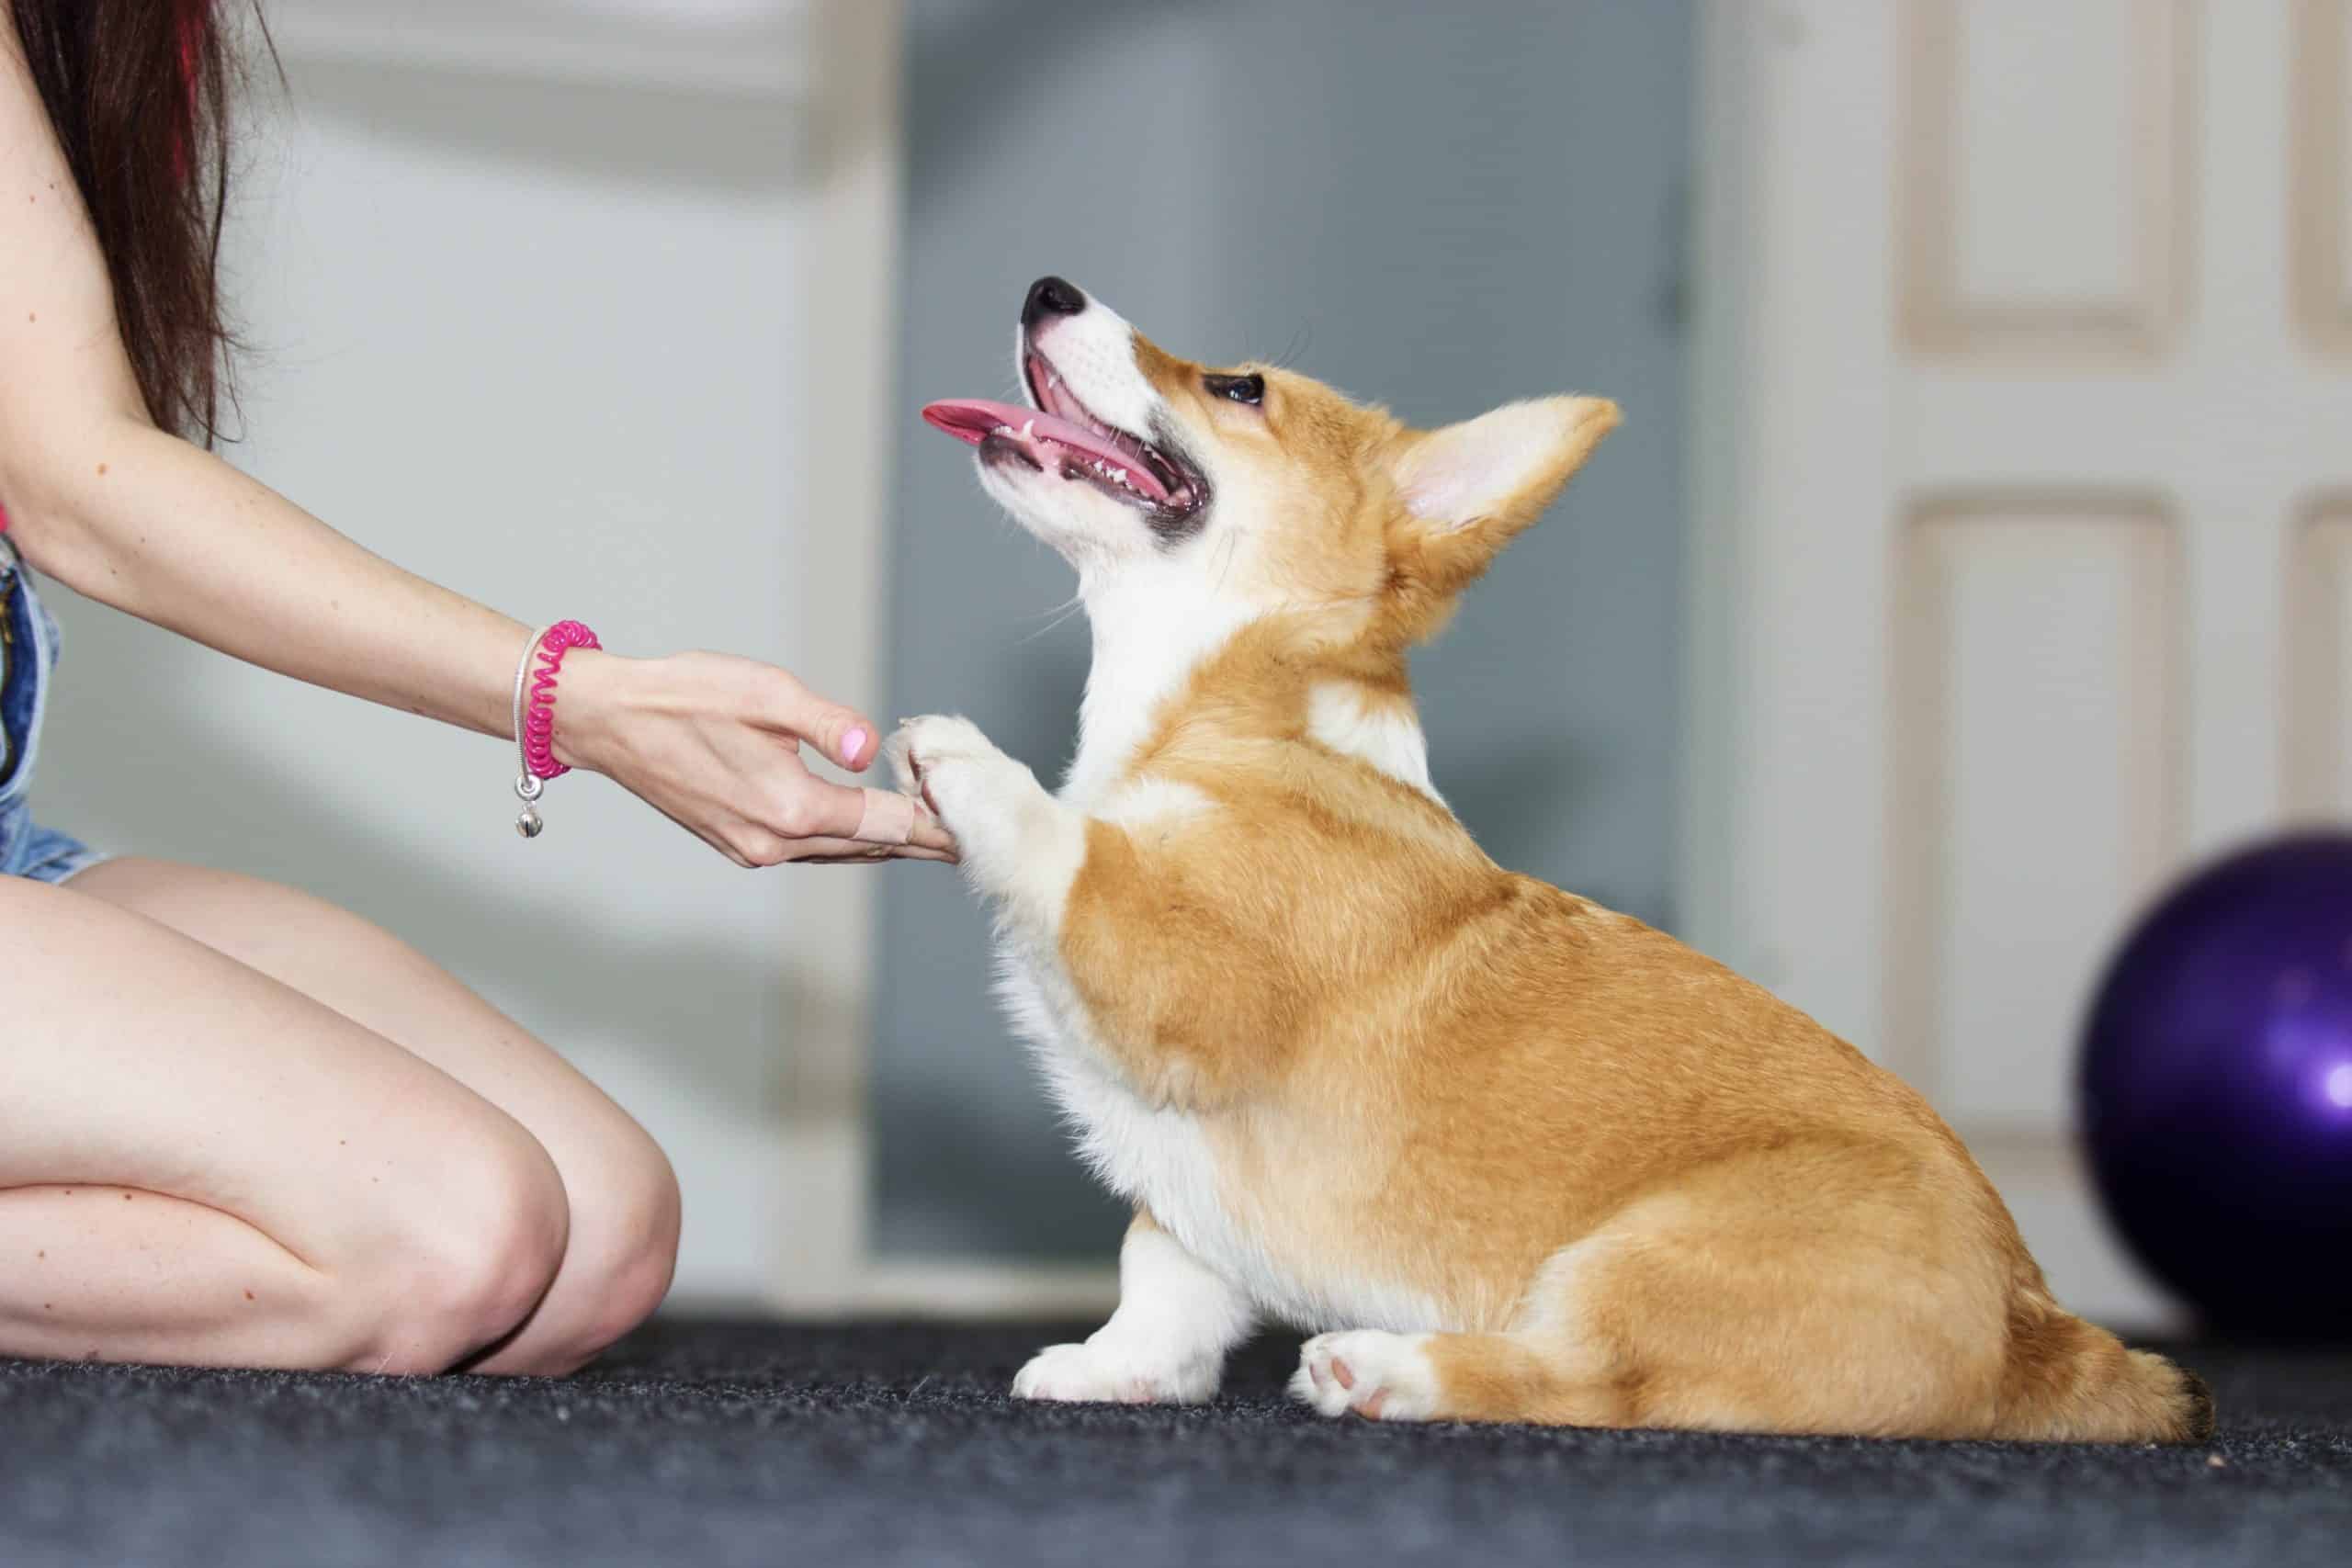 Woman teaches corgi puppy to sit. Sitting is a skill that is often learned quickly inside but takes dogs a long time to do reliably in all situations.